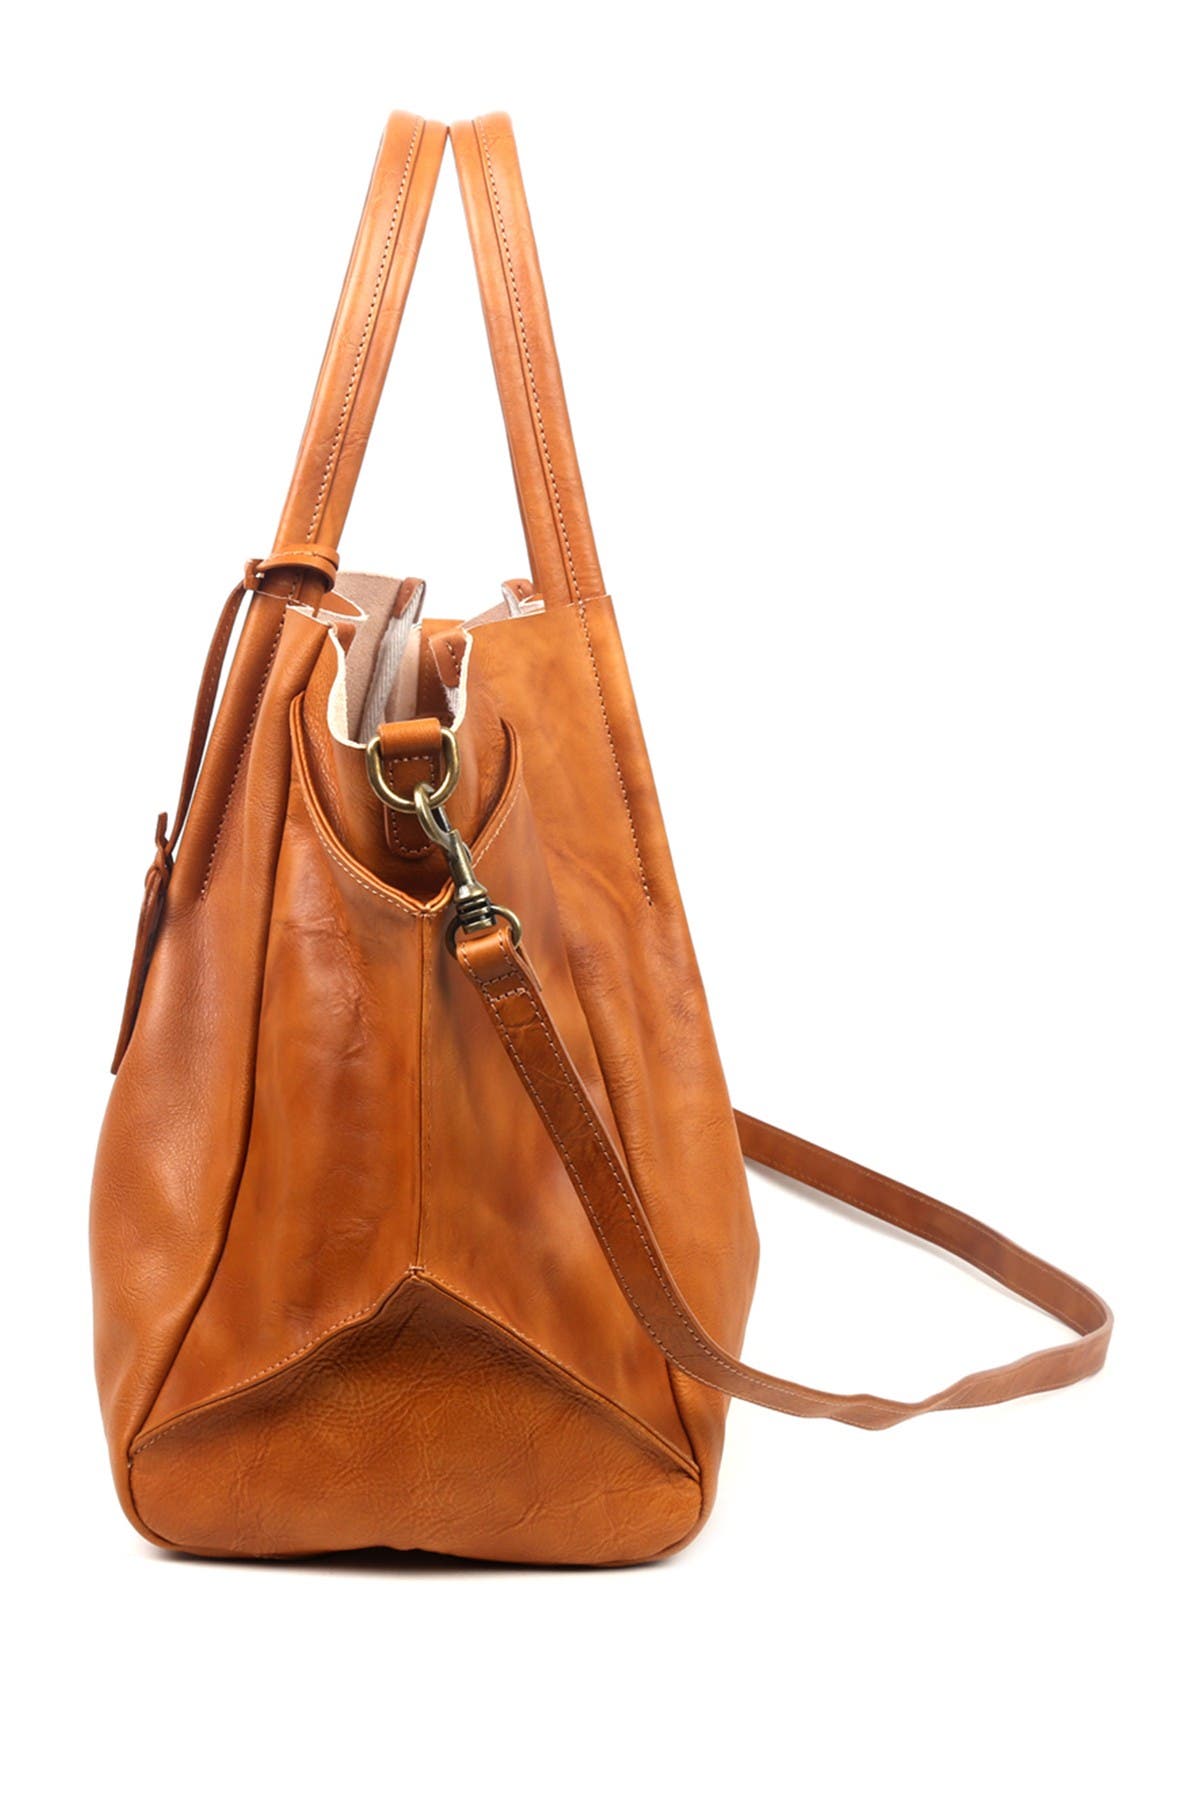 Old Trend | Sprout Land Leather Tote Bag | Nordstrom Rack